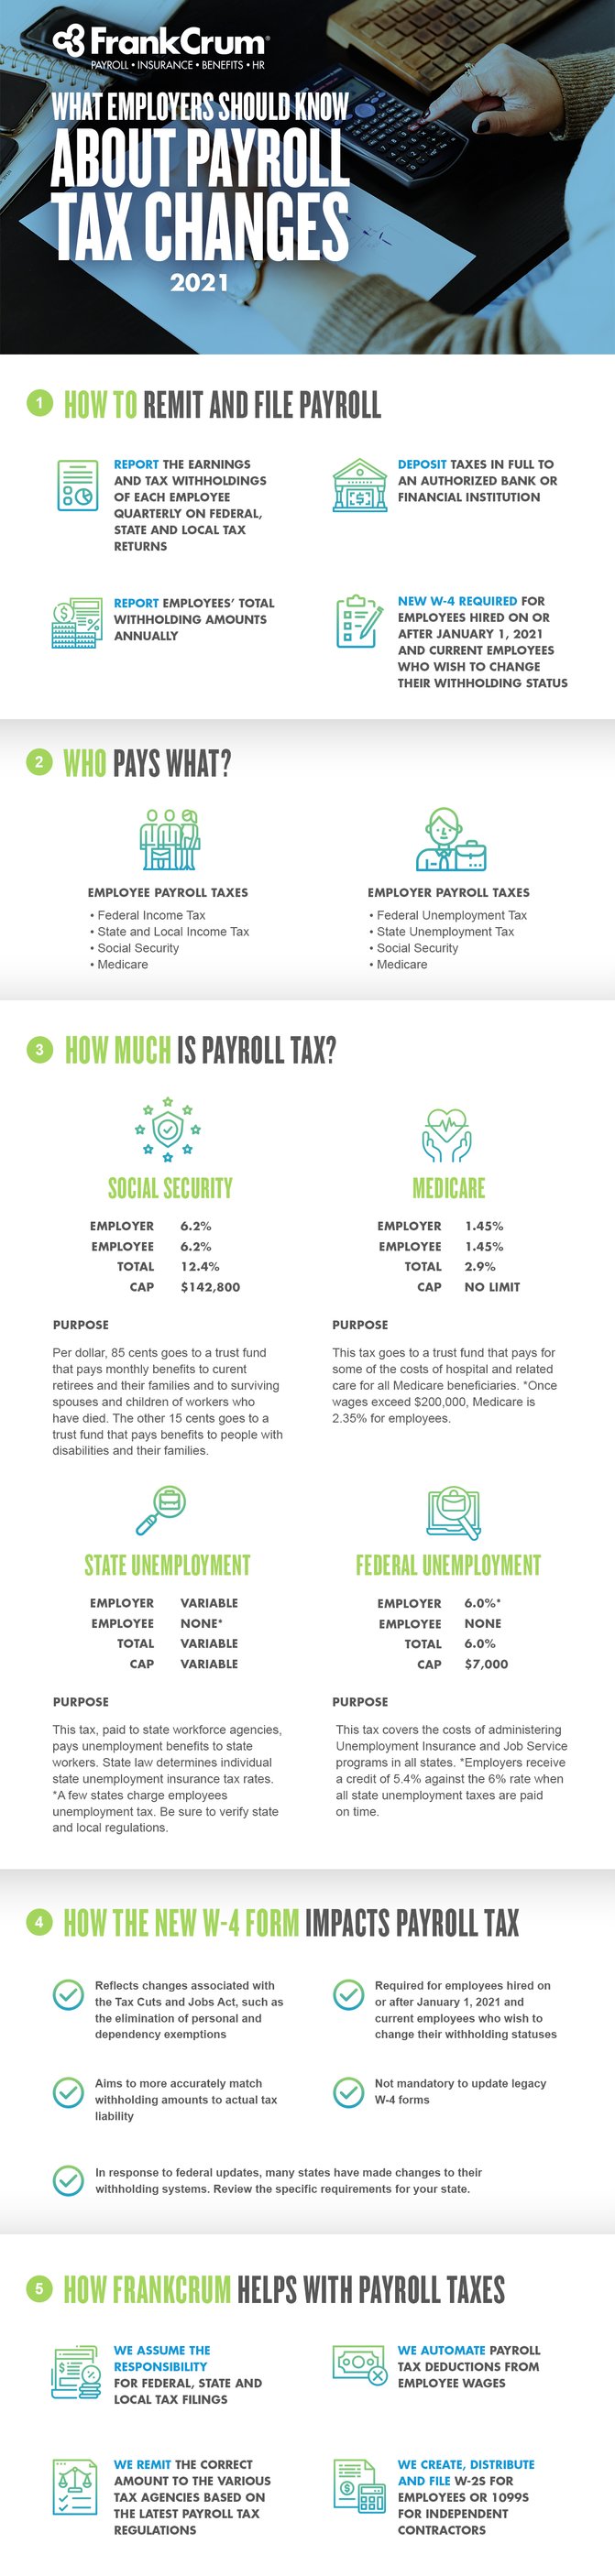 tax_roll_changes_Infographic_0221-1